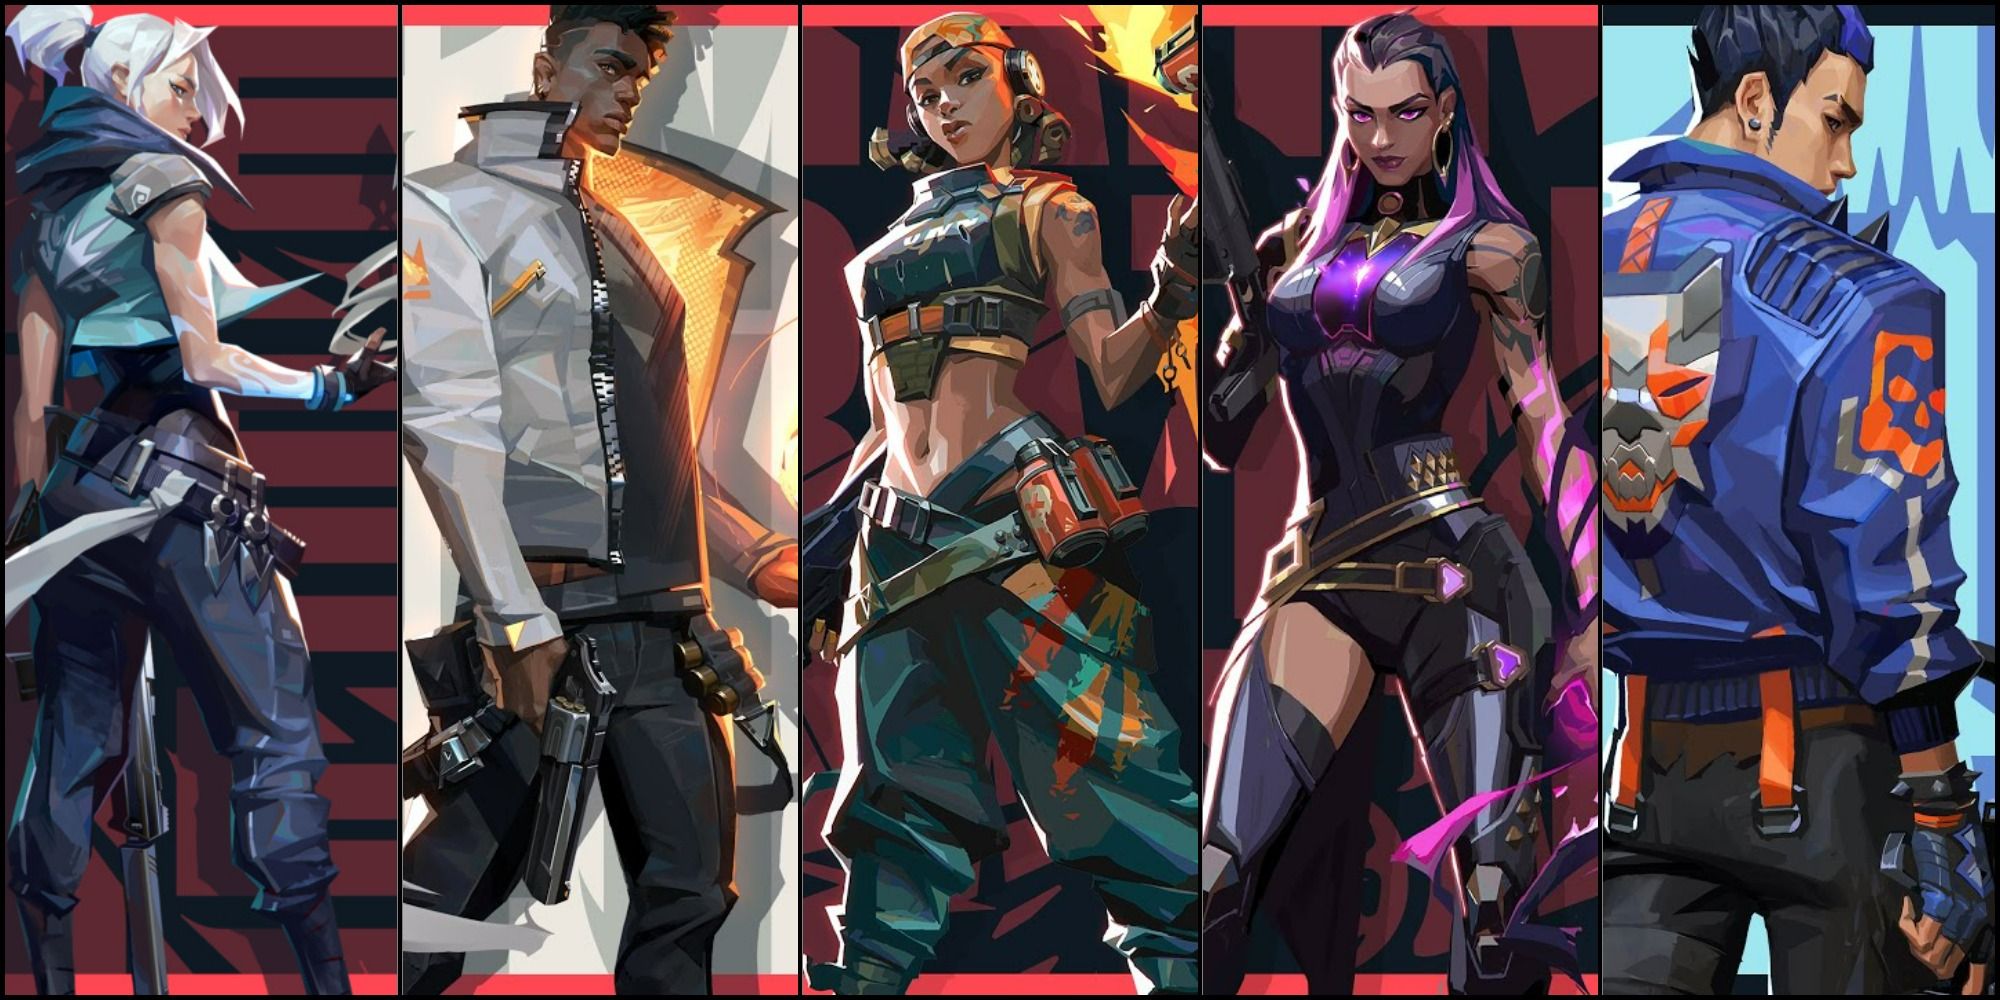 A Valorant feature image with all the duelists. From left to right: Jett, Phoenix, Raze, Reyna and Yoru